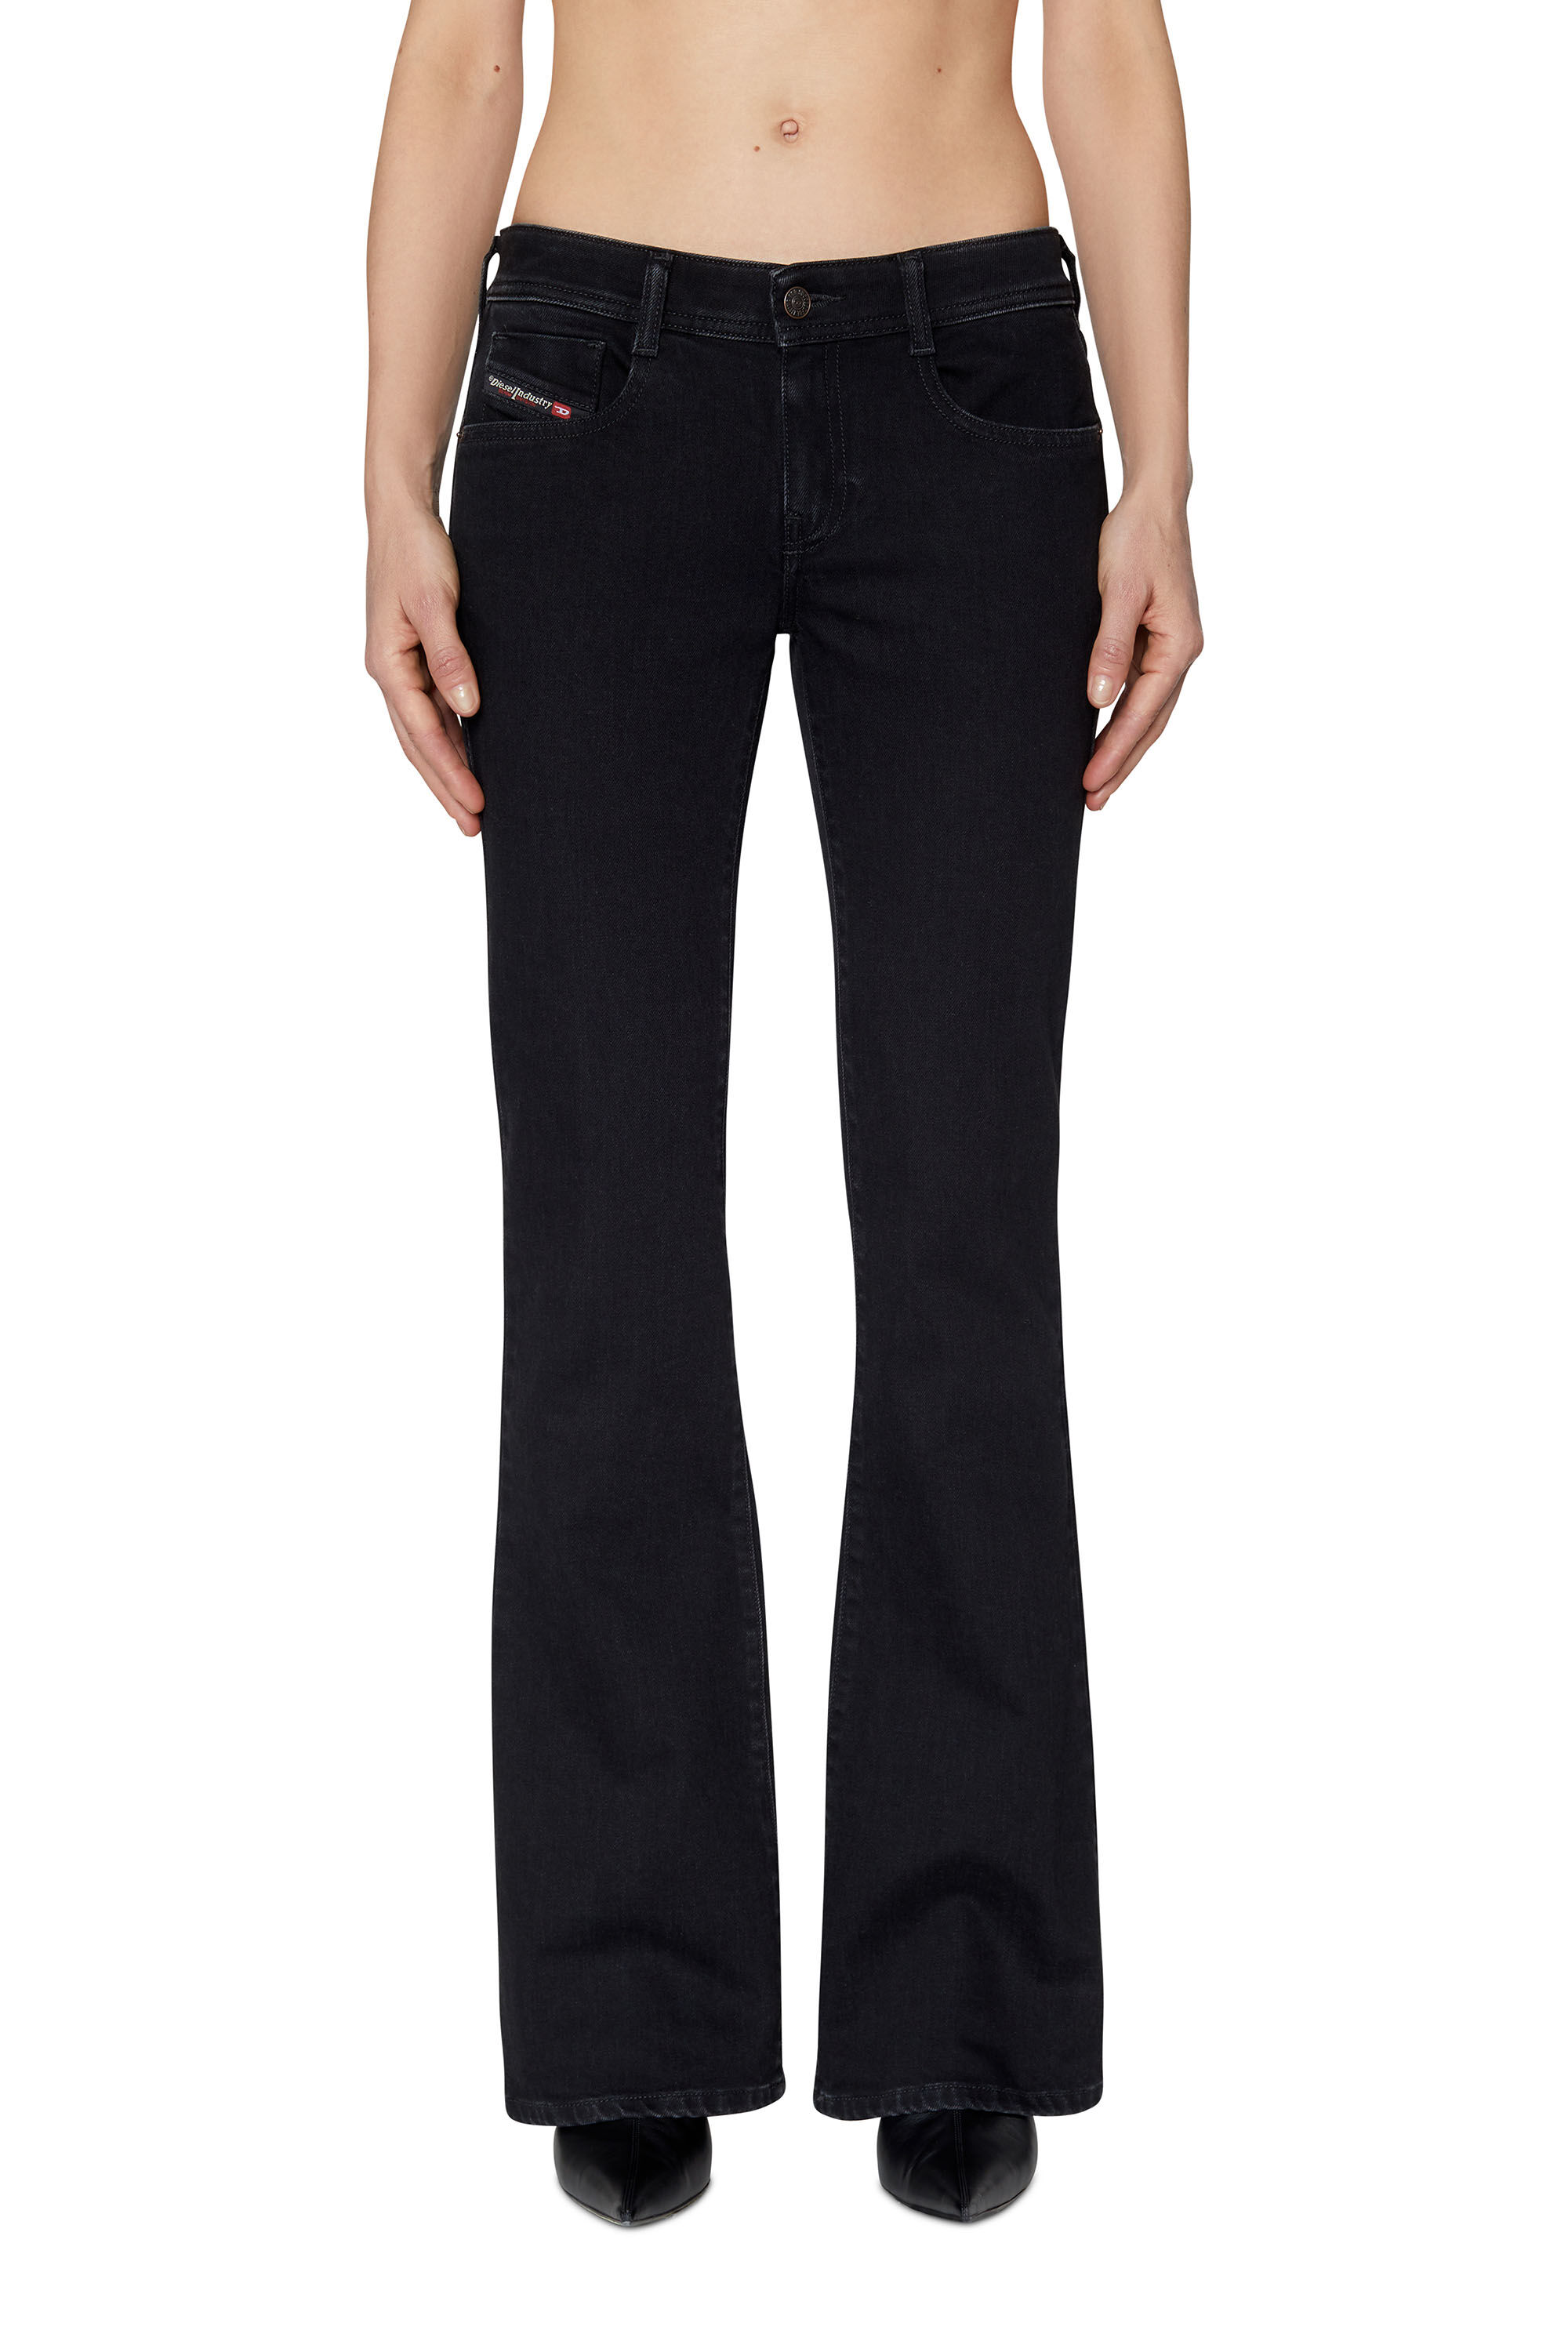 Bootcut and Flare Jeans 1969 D-Ebbey Z9C25